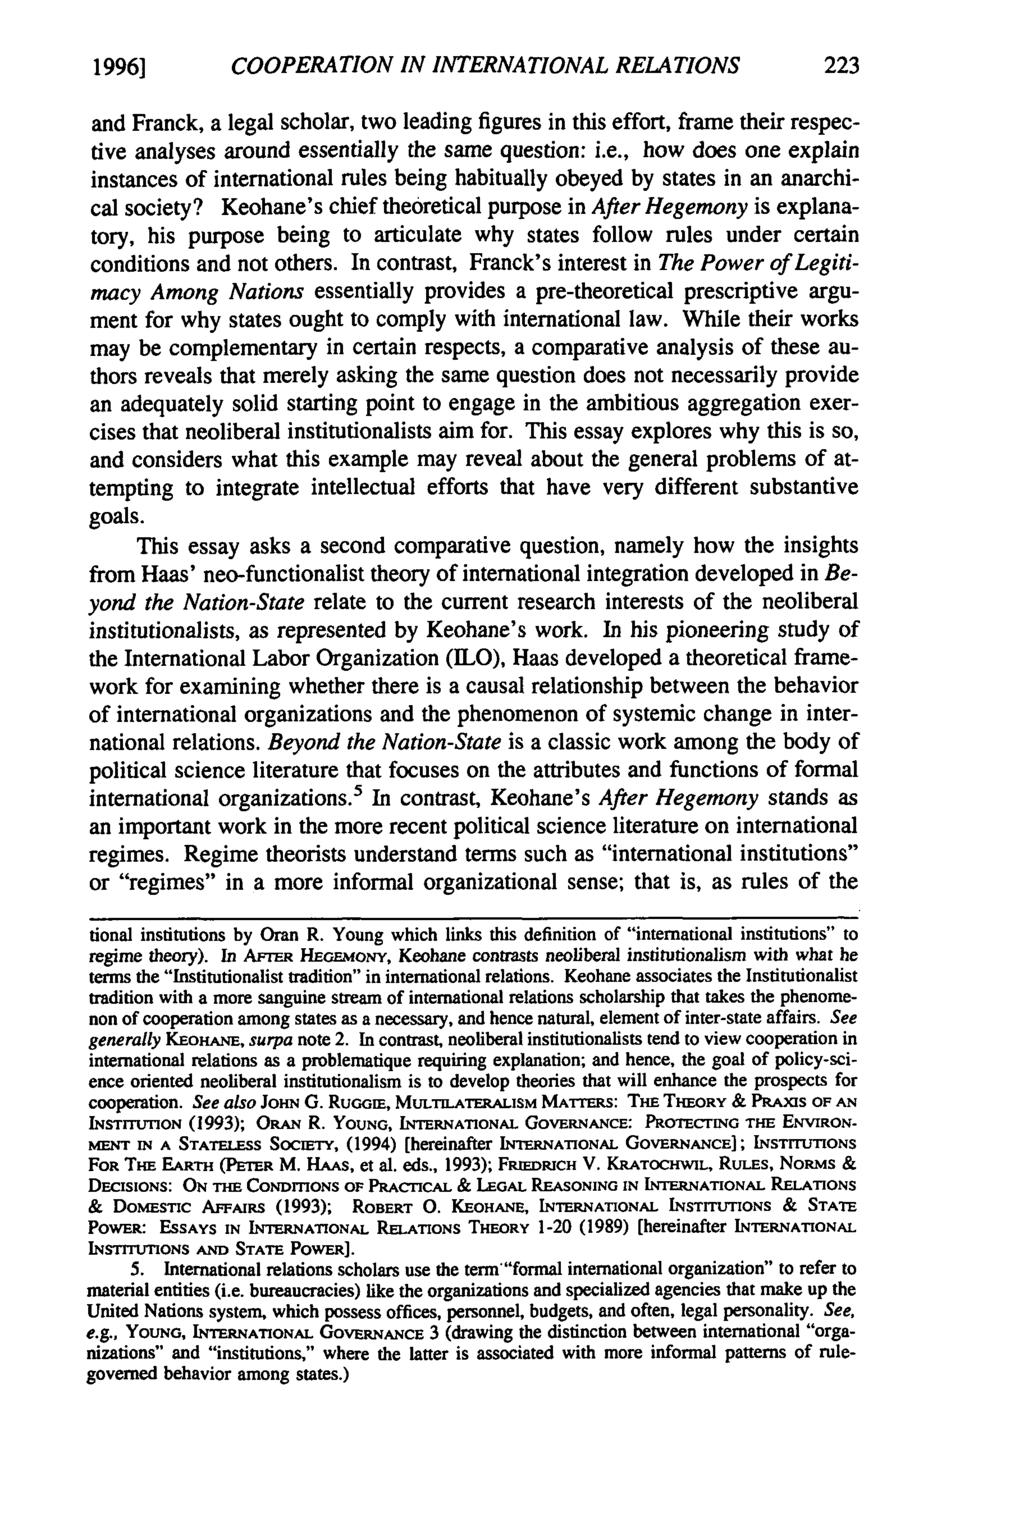 1996] COOPERATION IN INTERNATIONAL RELATIONS and Franck, a legal scholar, two leading figures in this effort, frame their respective analyses around essentially the same question: i.e., how does one explain instances of international rules being habitually obeyed by states in an anarchical society?